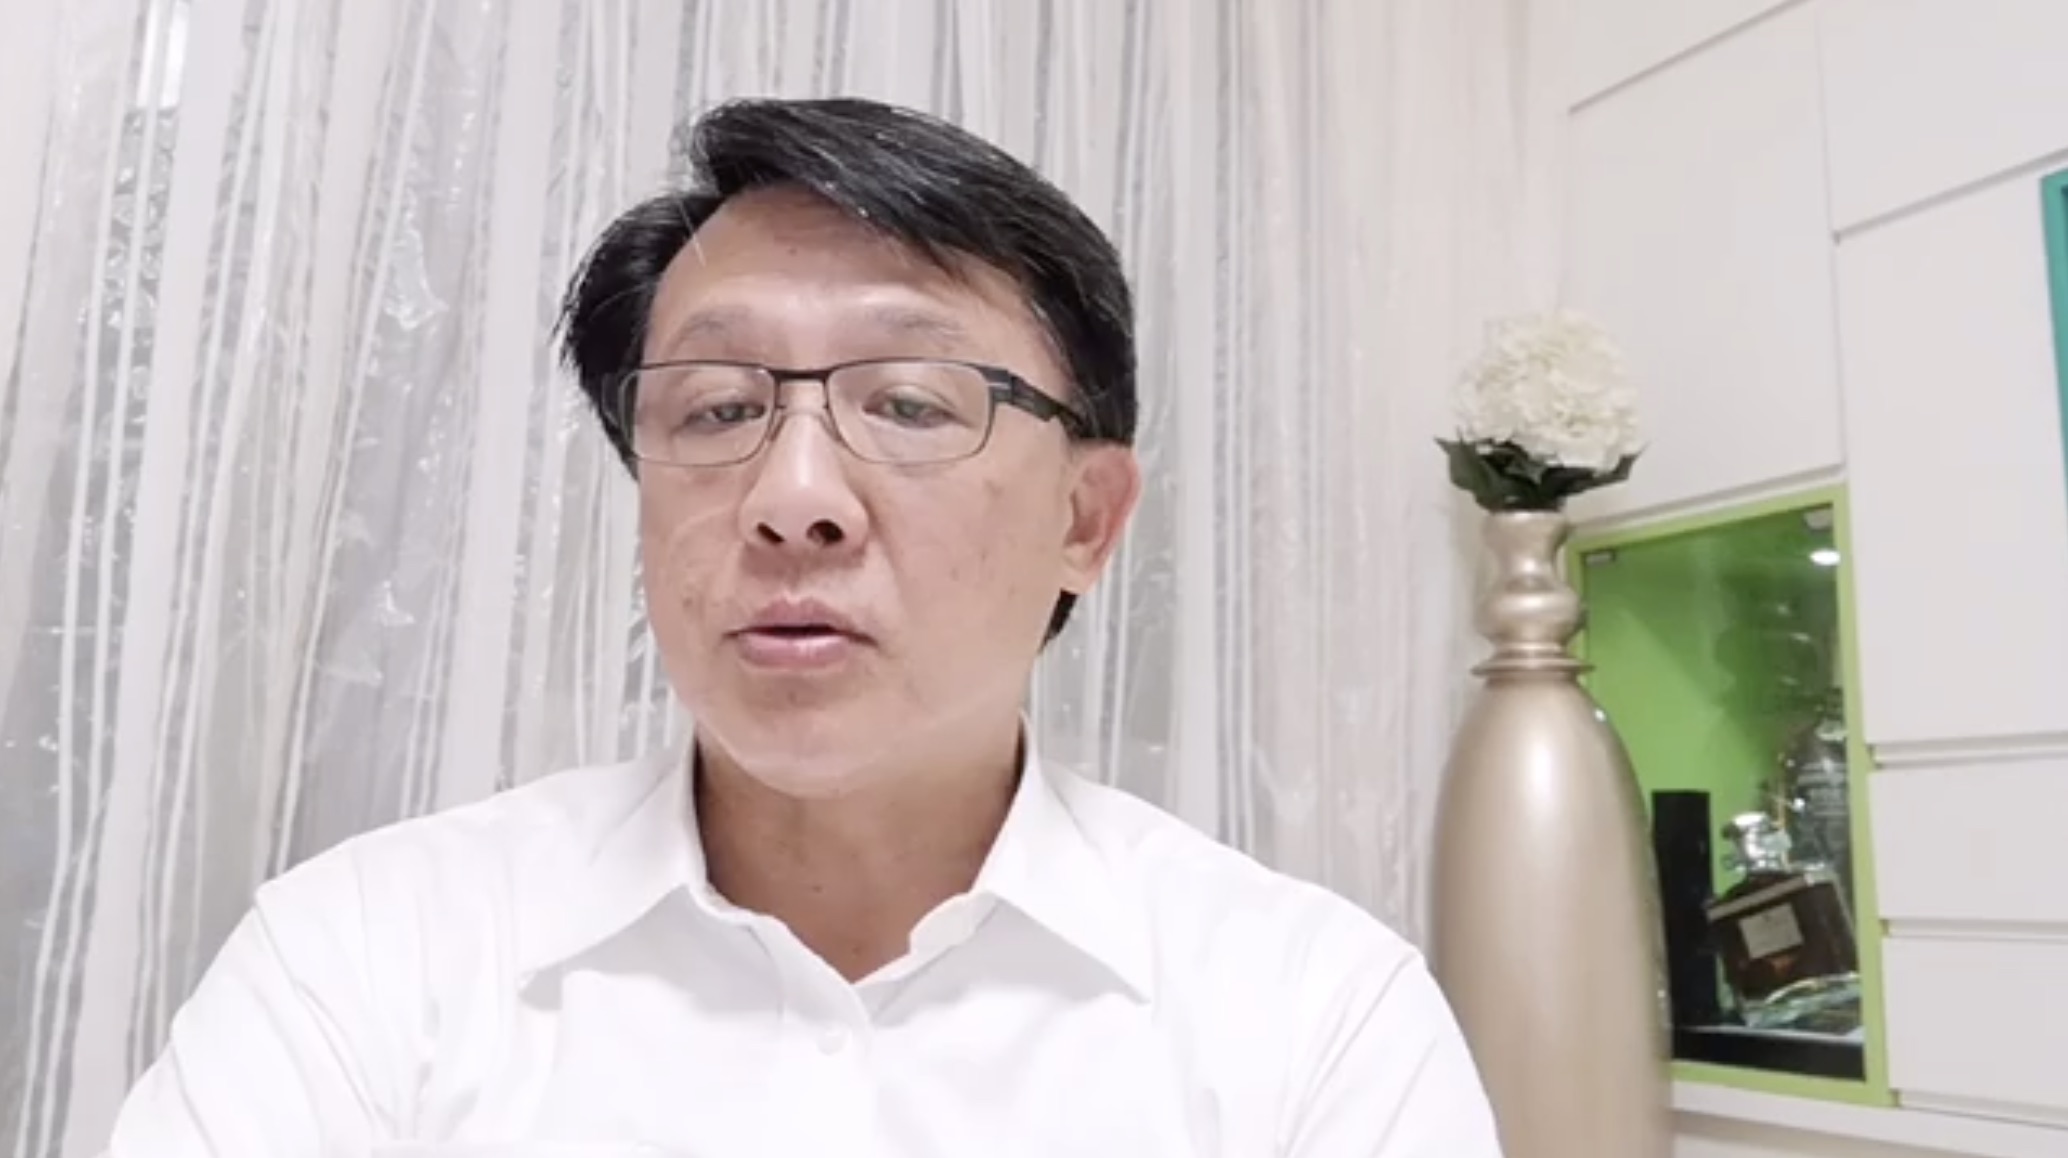 Pro-Beijing lawmaker Junius Ho announcing details of a clean up day taking place this Saturday. Screengrab via Facebook video.